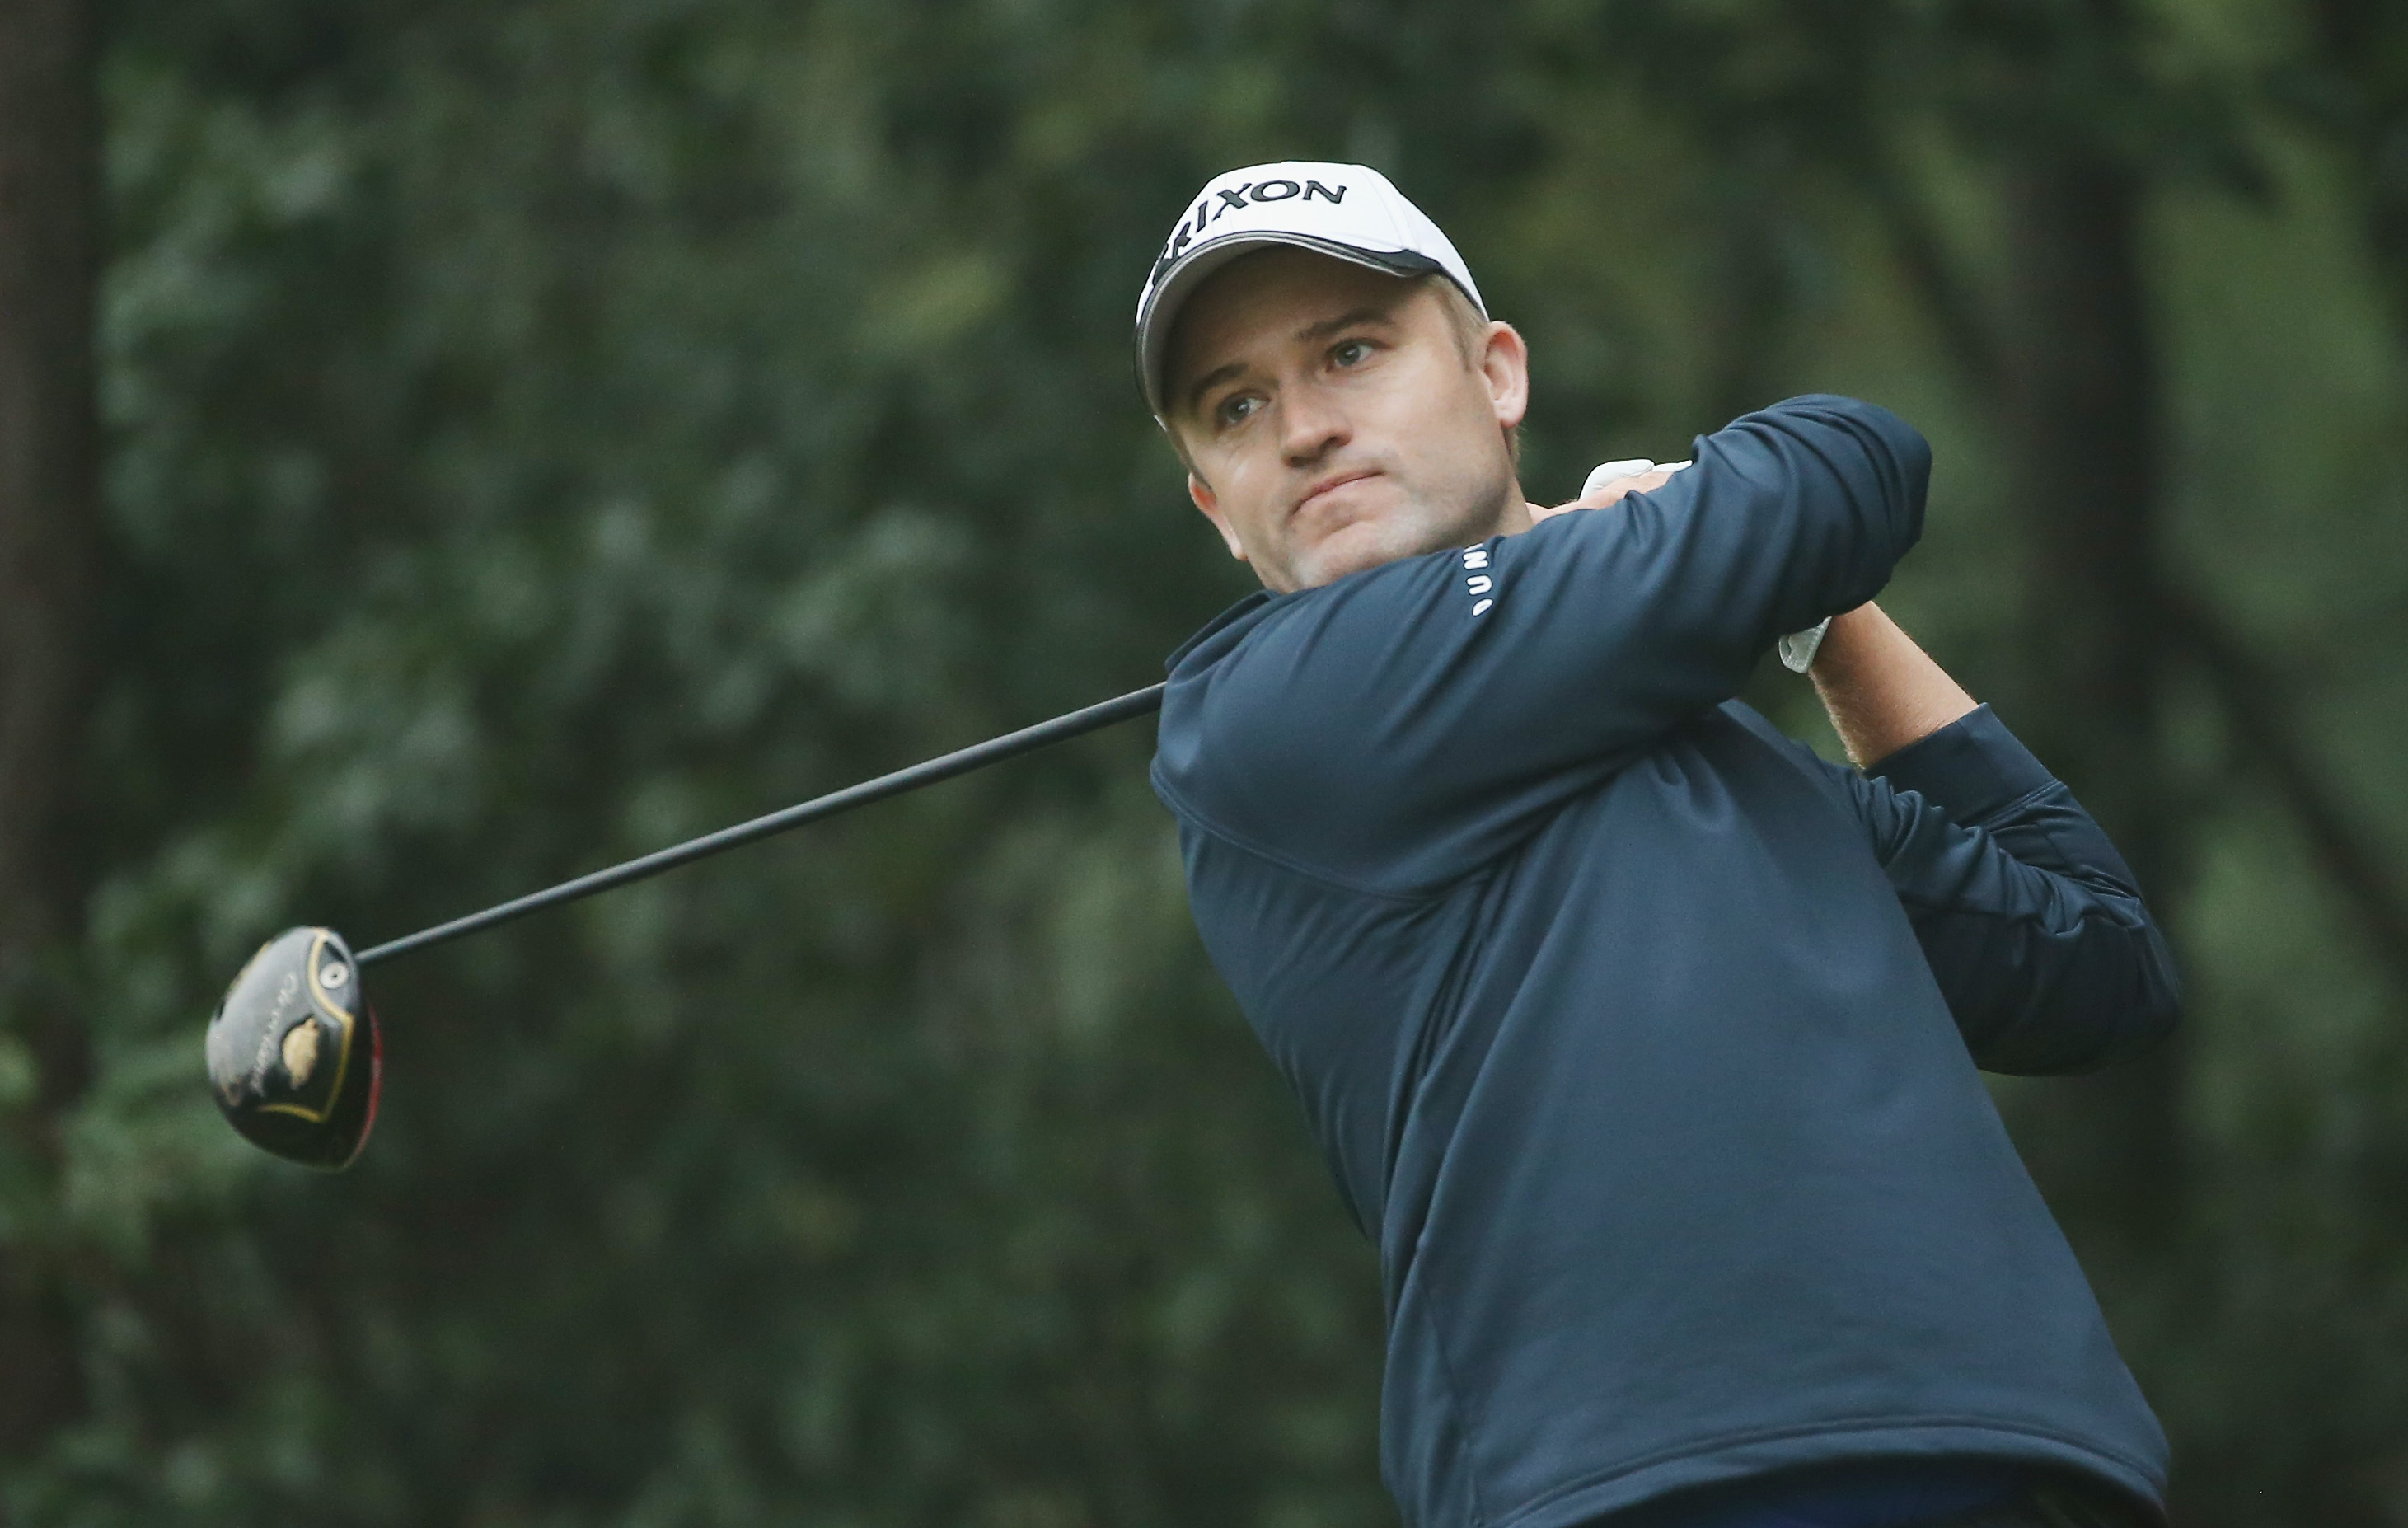 Knox led the field in birdies in Shanghai (Photo: Getty Images)